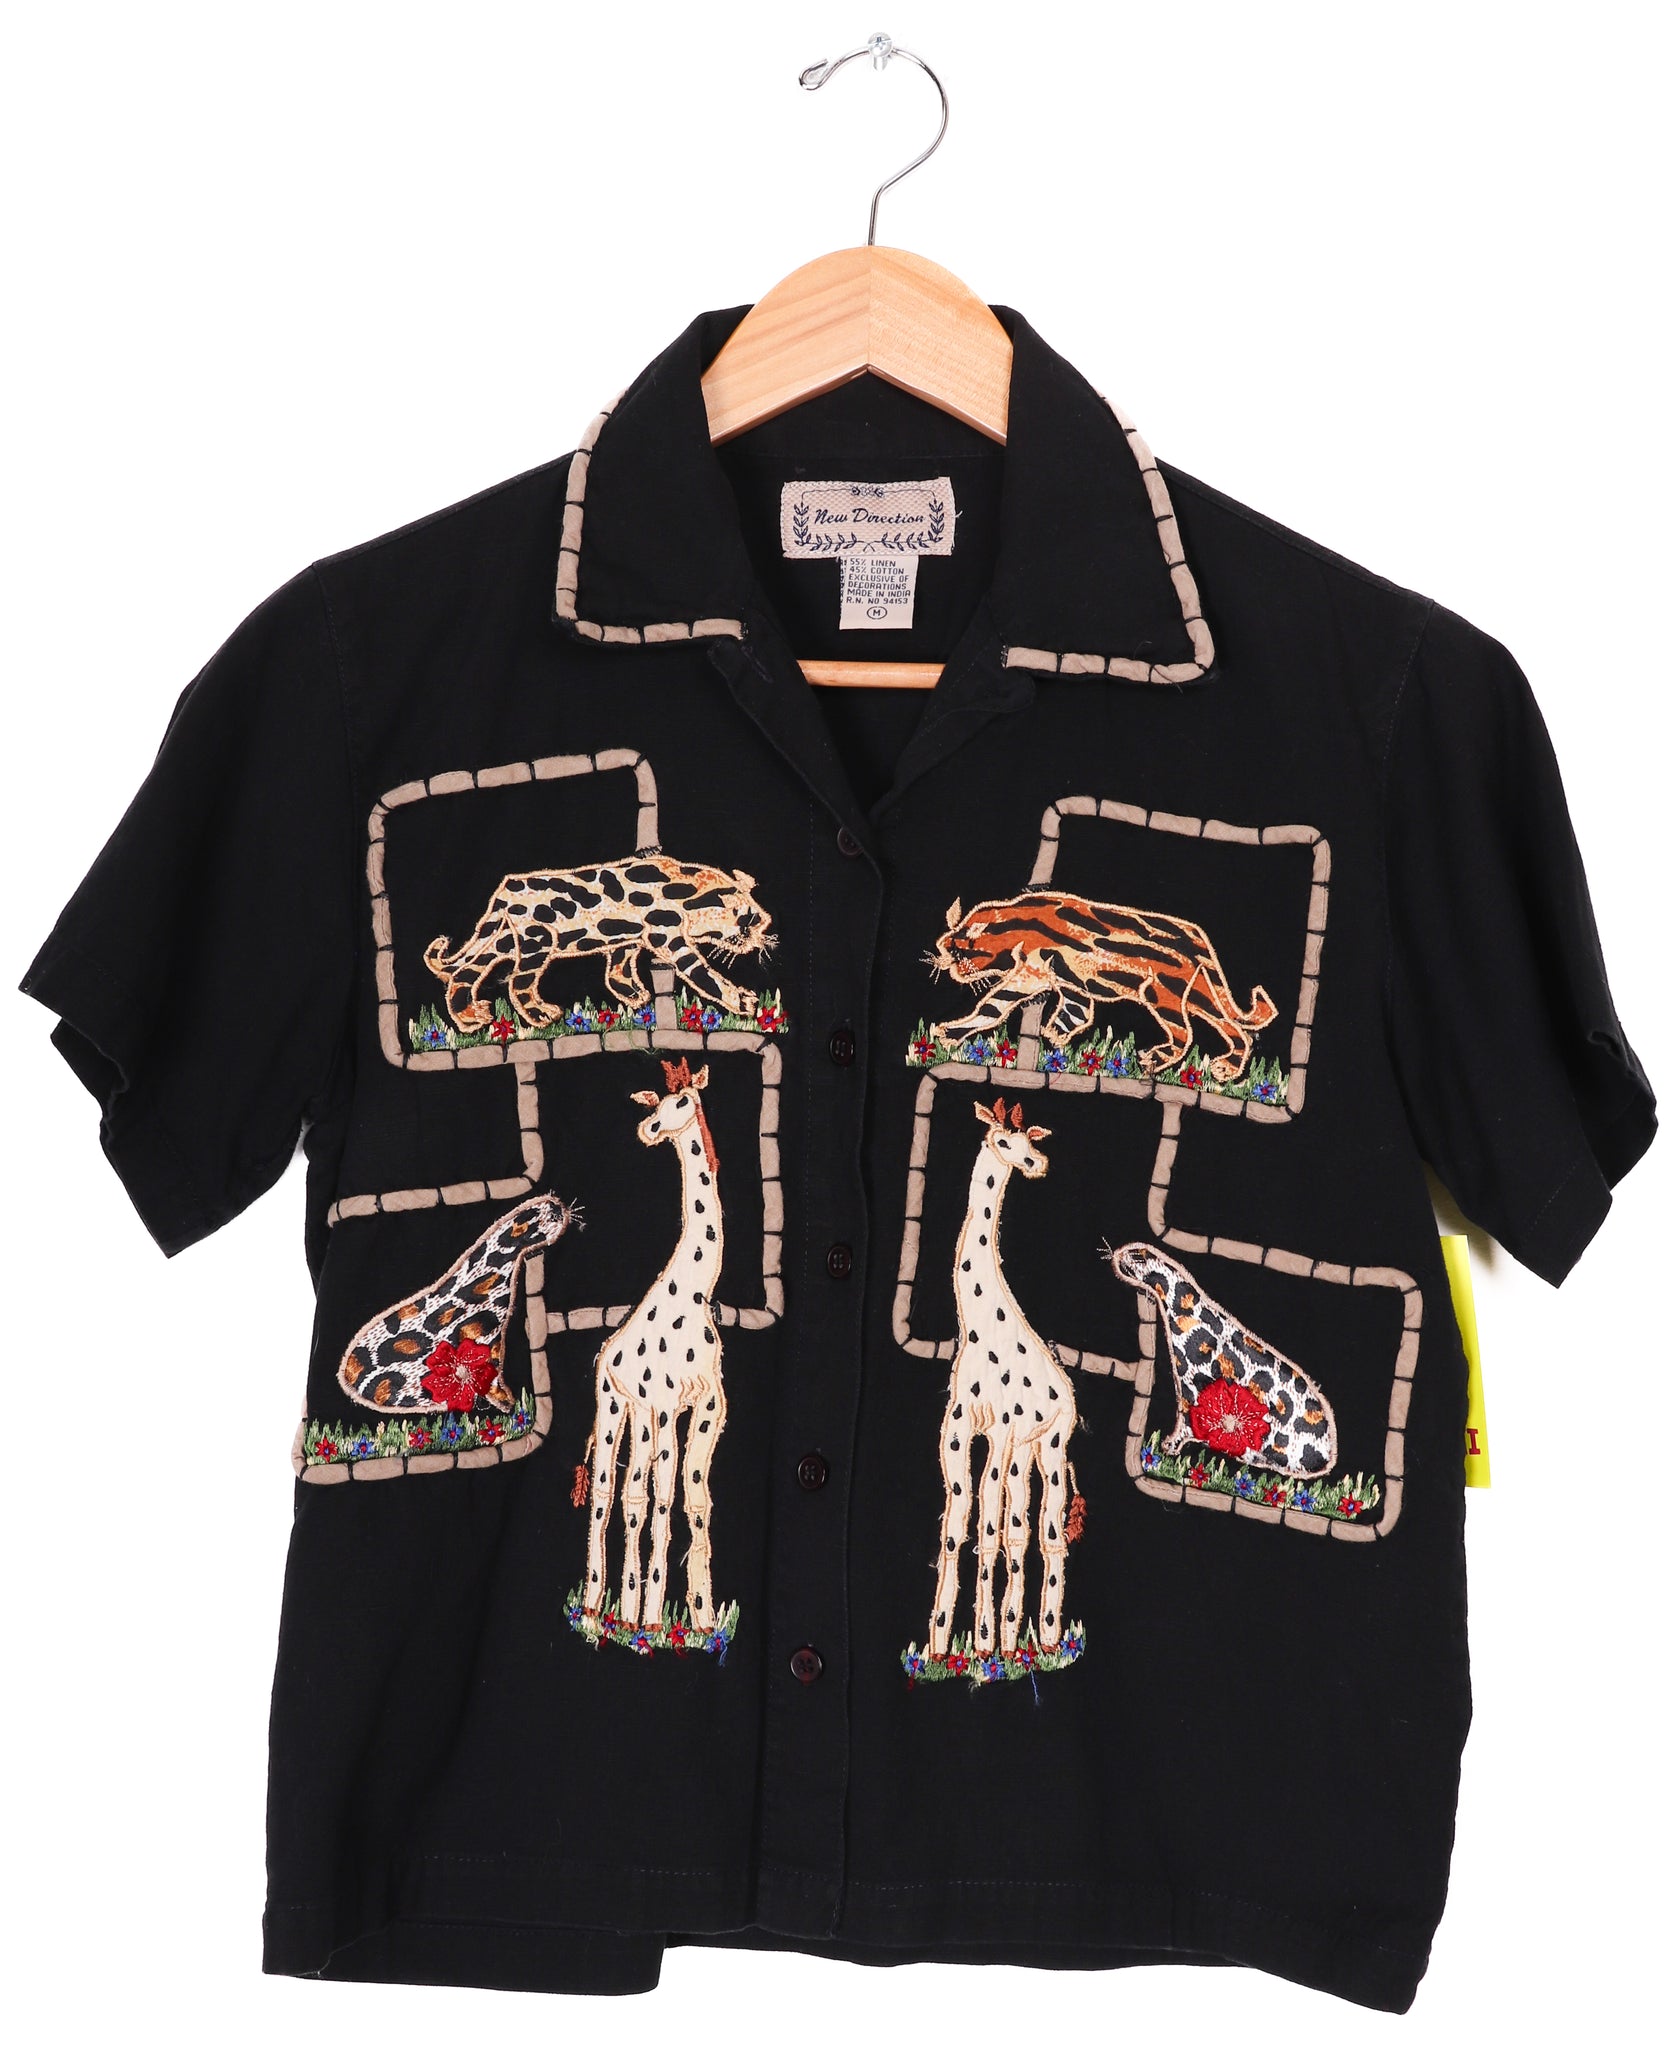 New Directions Embroidered Safari Animals Blouse